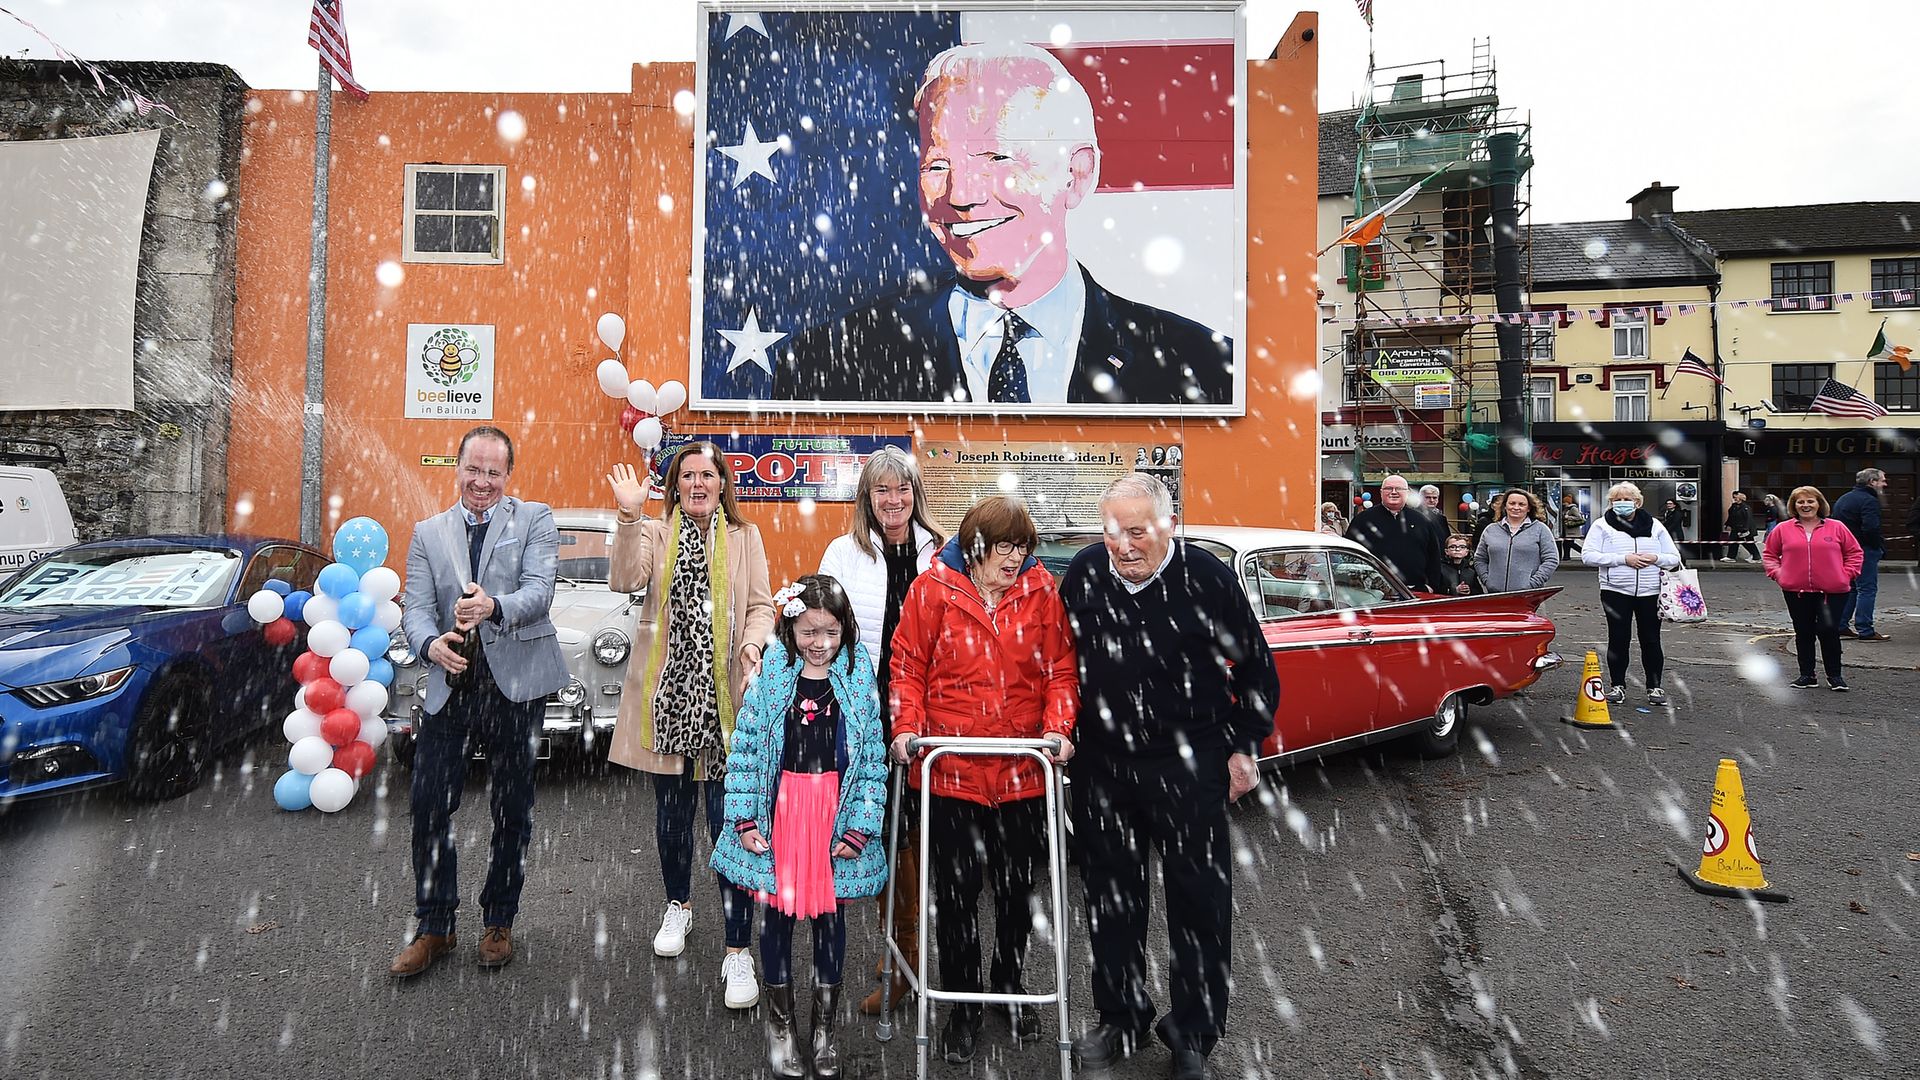 Joe Blewitt a cousin of Joe Biden sprays a bottle of champagne along with family members underneath a mural of the president-elect in Ballina, Ireland, where his relatives hail from - Credit: Getty Images